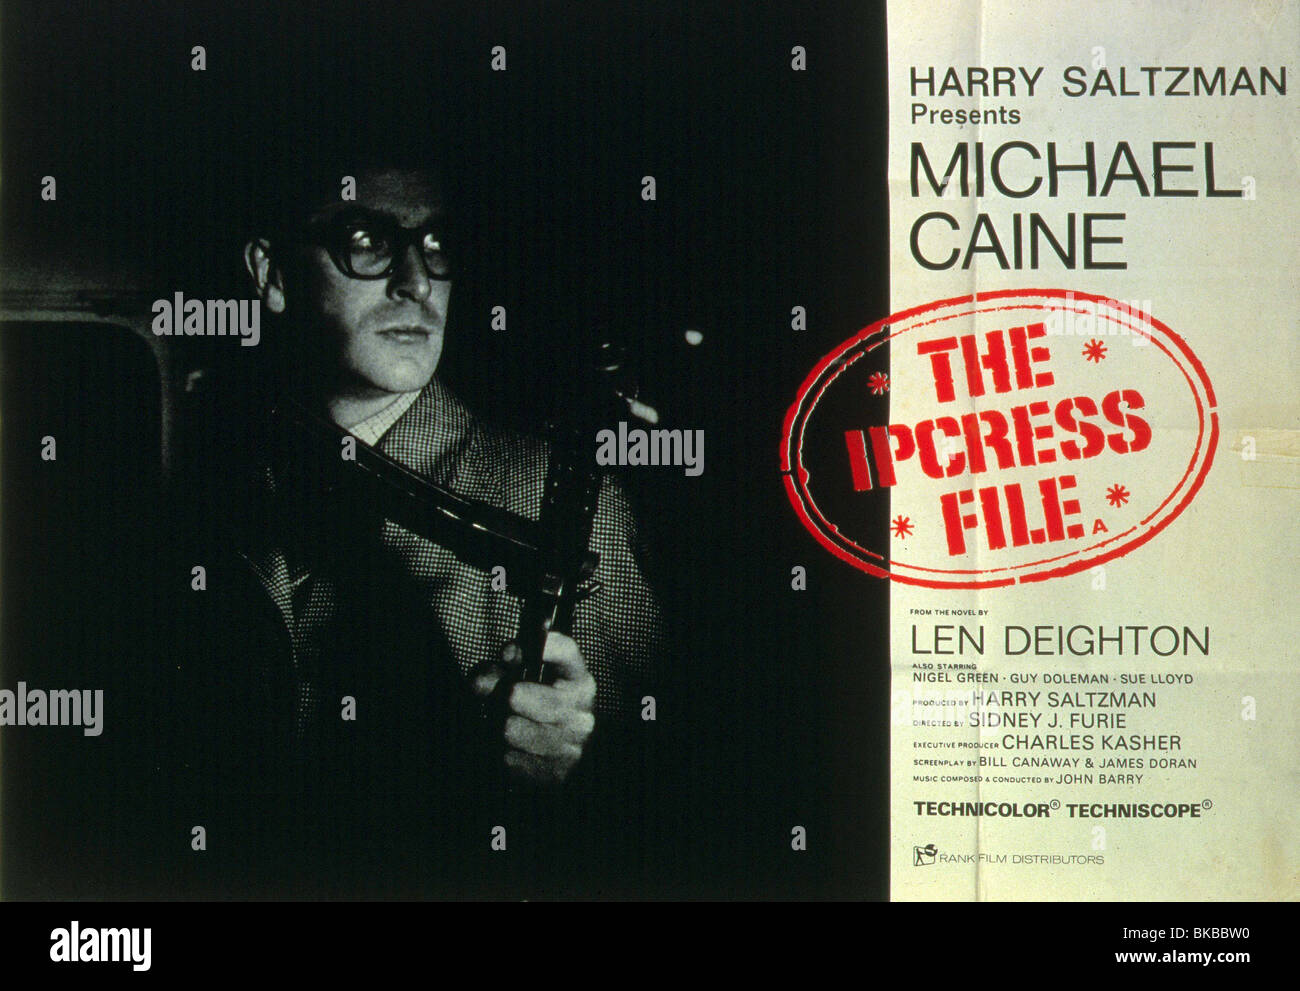 THE IPCRESS FILE (1965) MICHAEL CAINE POSTER IPF 008 H Stock Photo